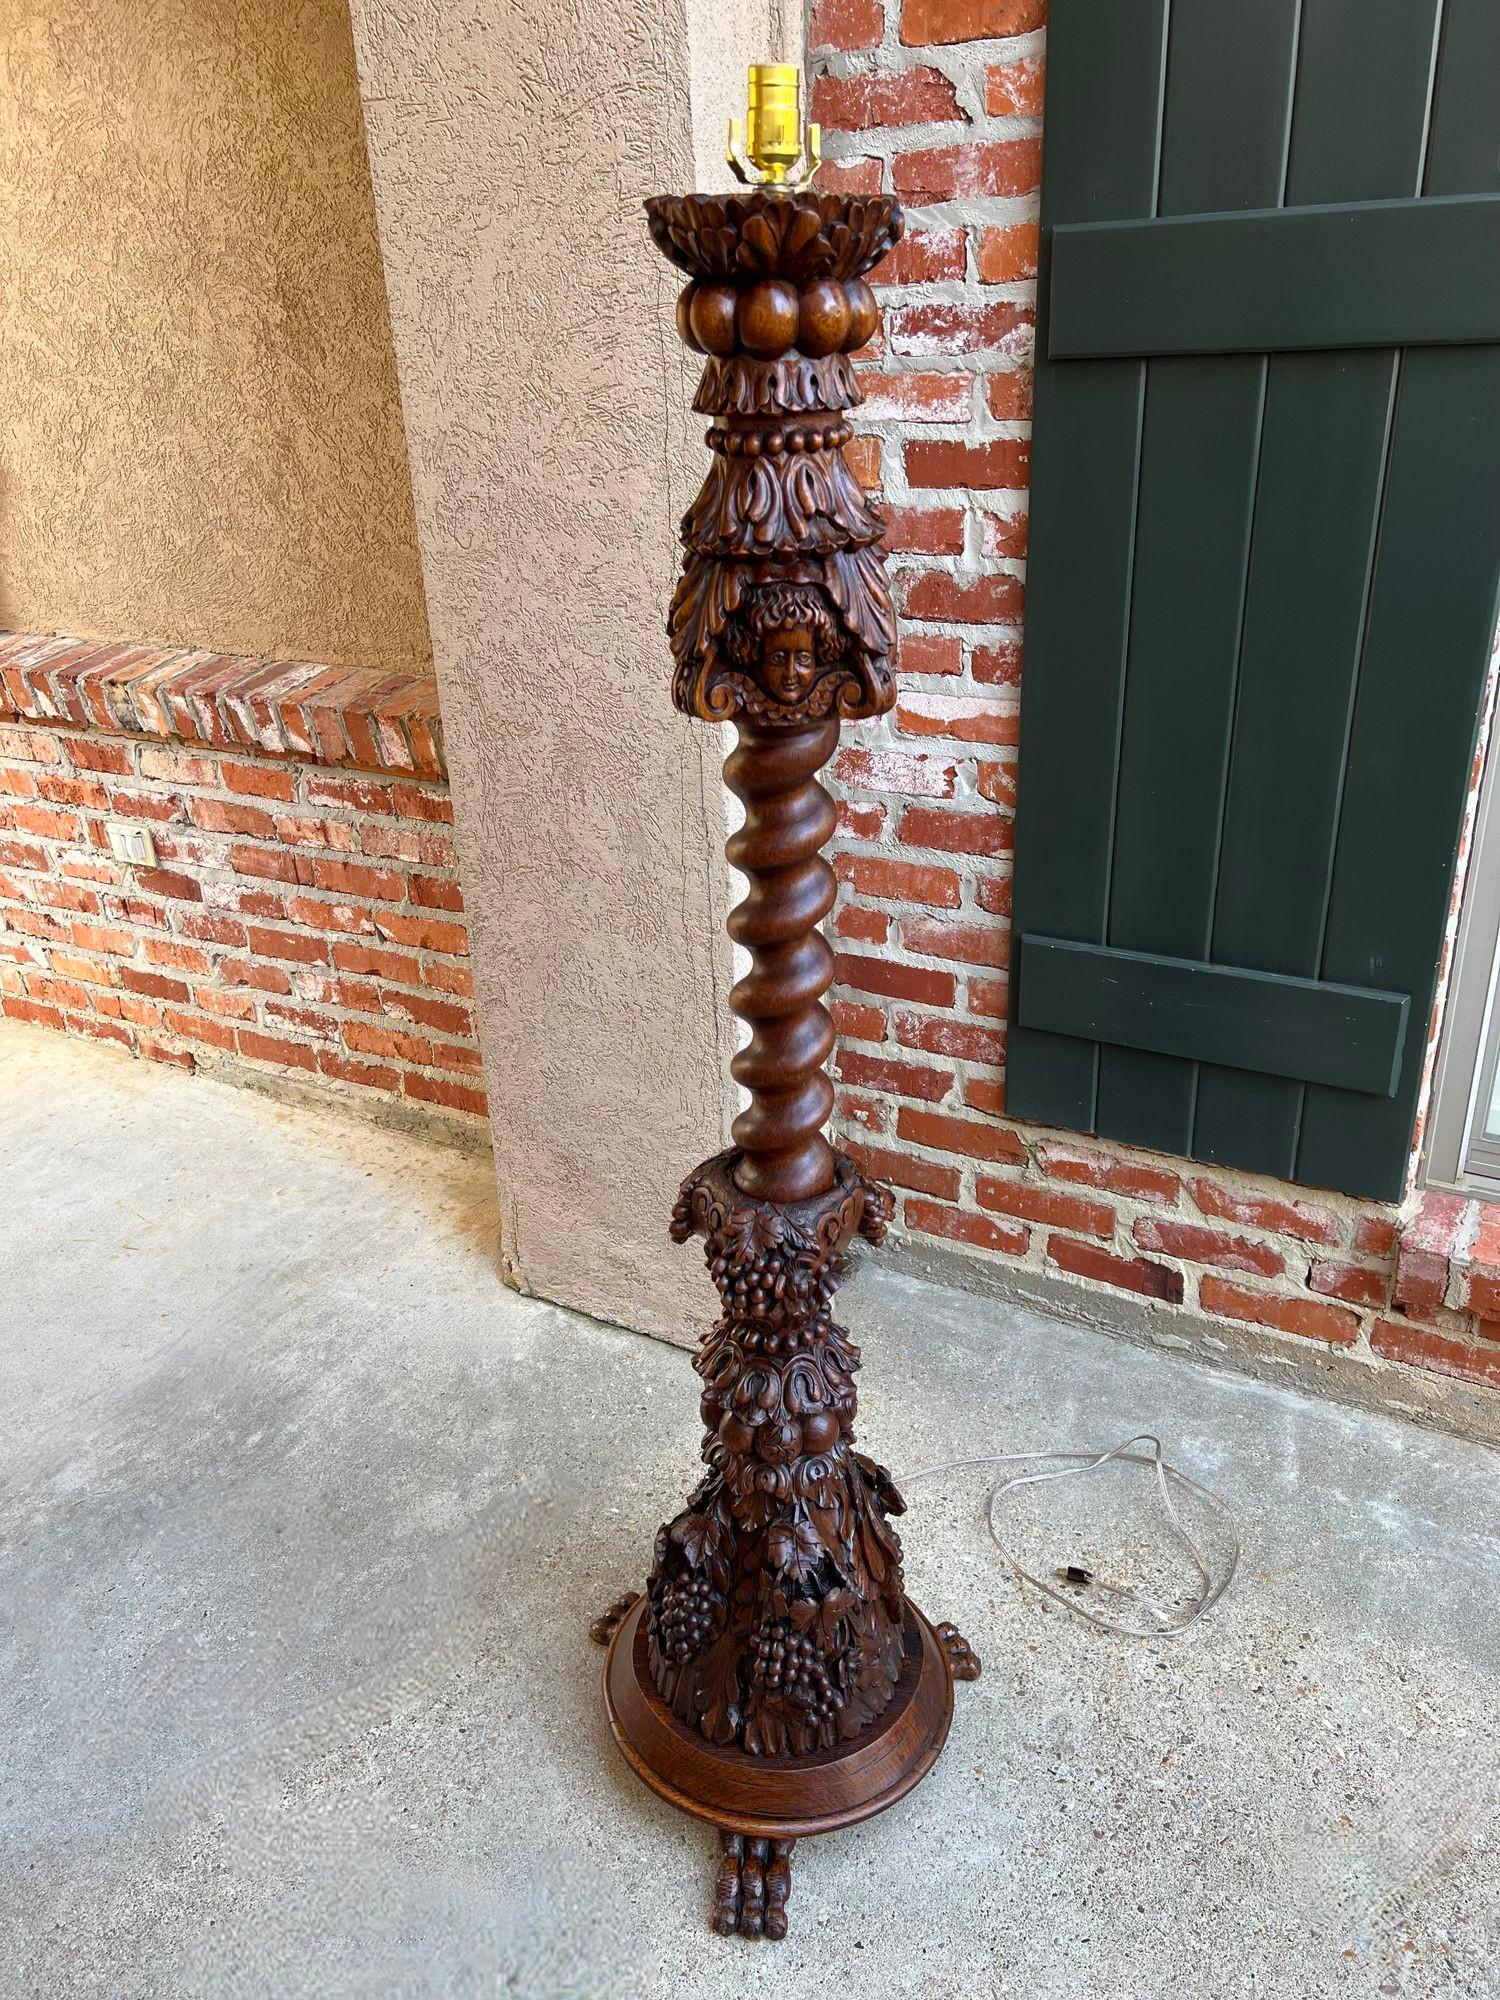 Antique French Renaissance Floor Lamp Light Carved Oak Barley Twist Baluster.

Direct from France to us, a magnificent antique floor lamp, large, heavy, solid oak and probably the most ornate carvings we’ve seen on a floor lamp in ten years or more!